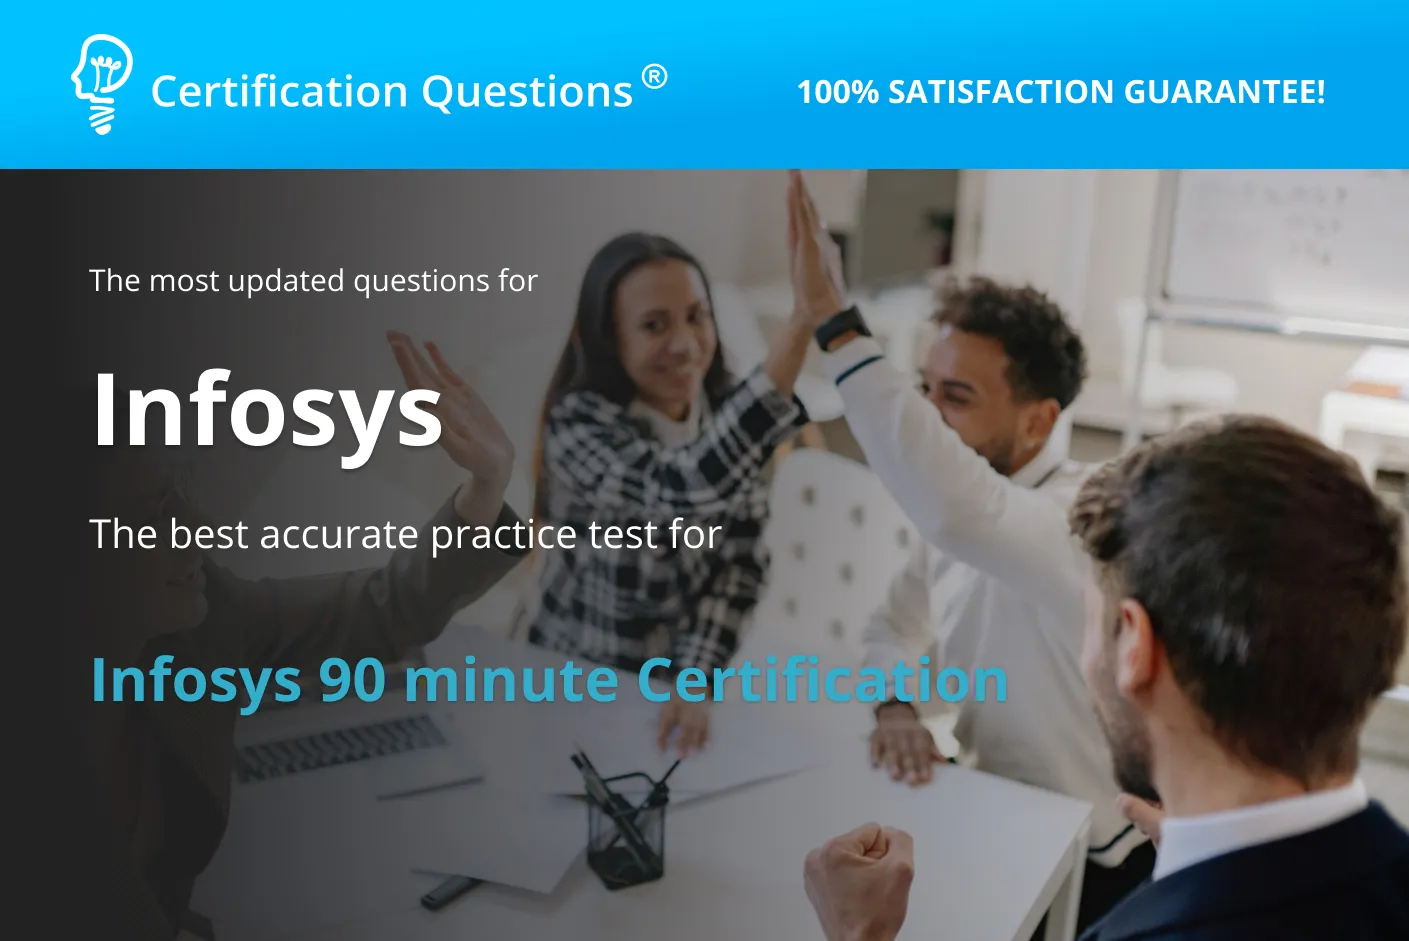 This image represents the Infosys 90 minute Certification in the USA